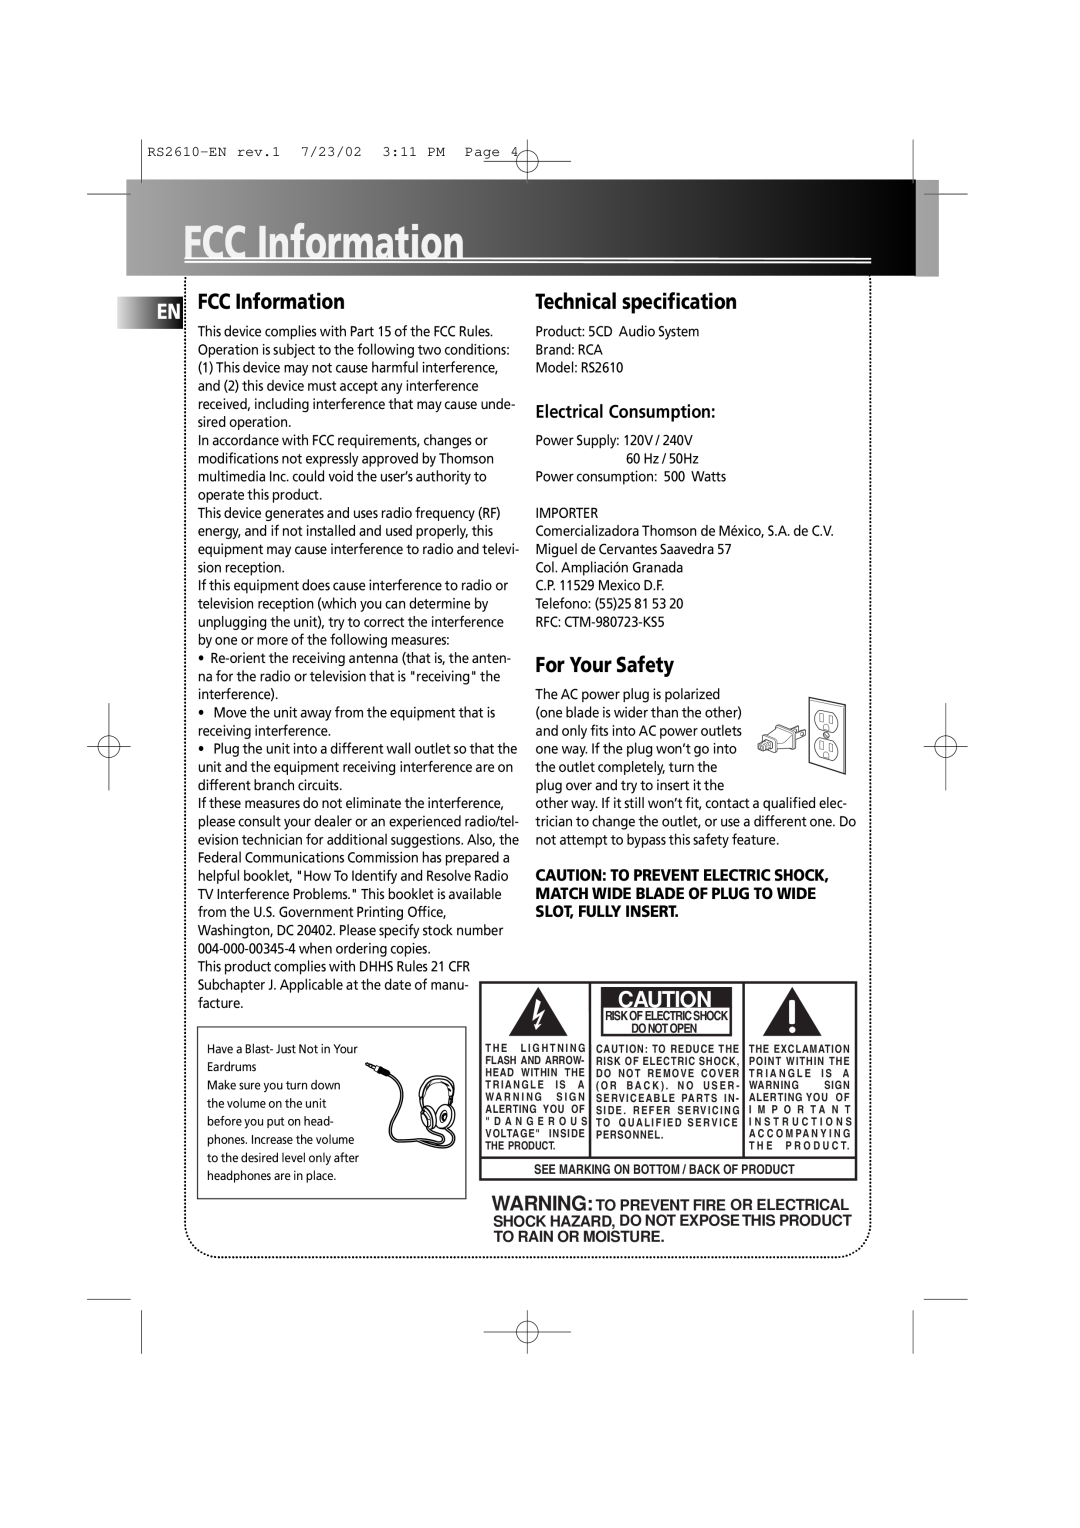 RCA RS2610 manual EN FCC Information, For Your Safety, Caution To Prevent Electric Shock, Slot, Fully Insert 